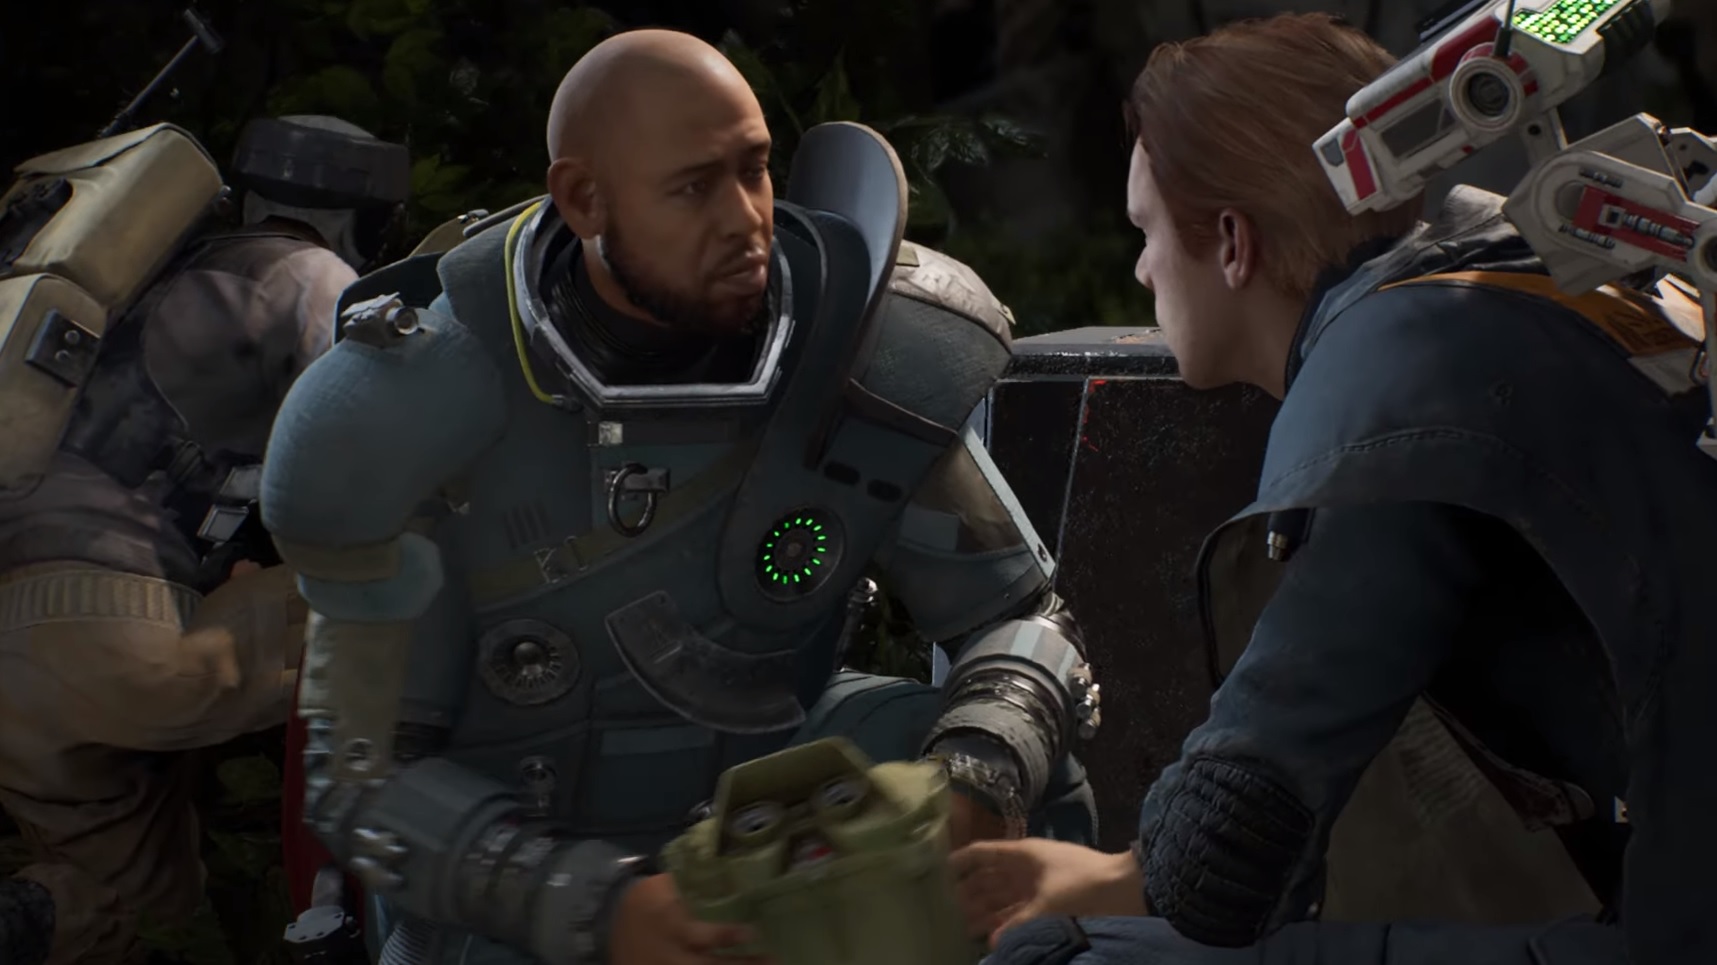 Star Wars Jedi: Fallen Order features Rogue One characters